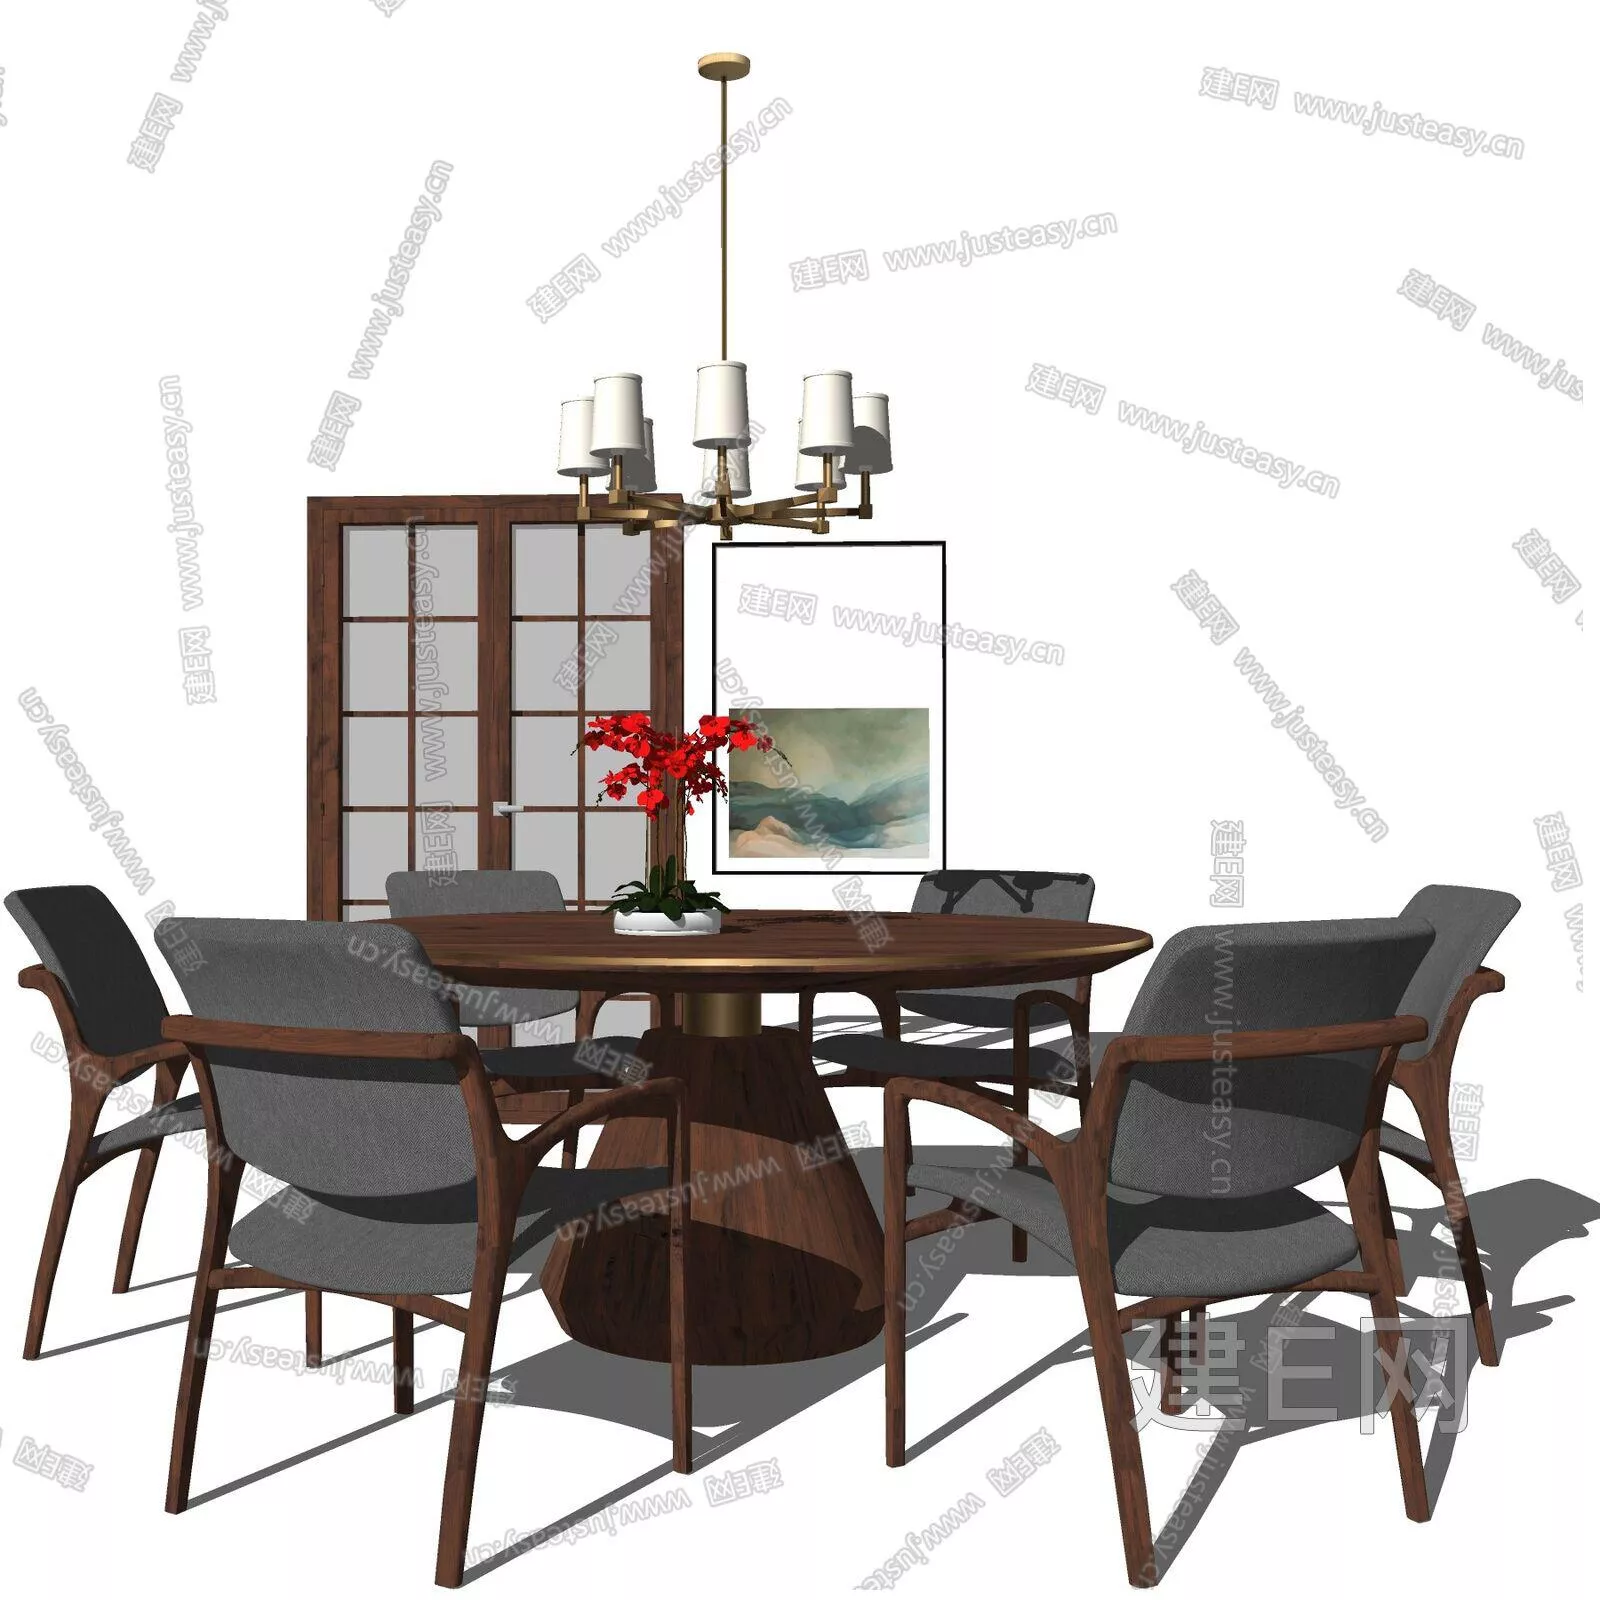 CHINESE DINING TABLE SET - SKETCHUP 3D MODEL - ENSCAPE - 112804305